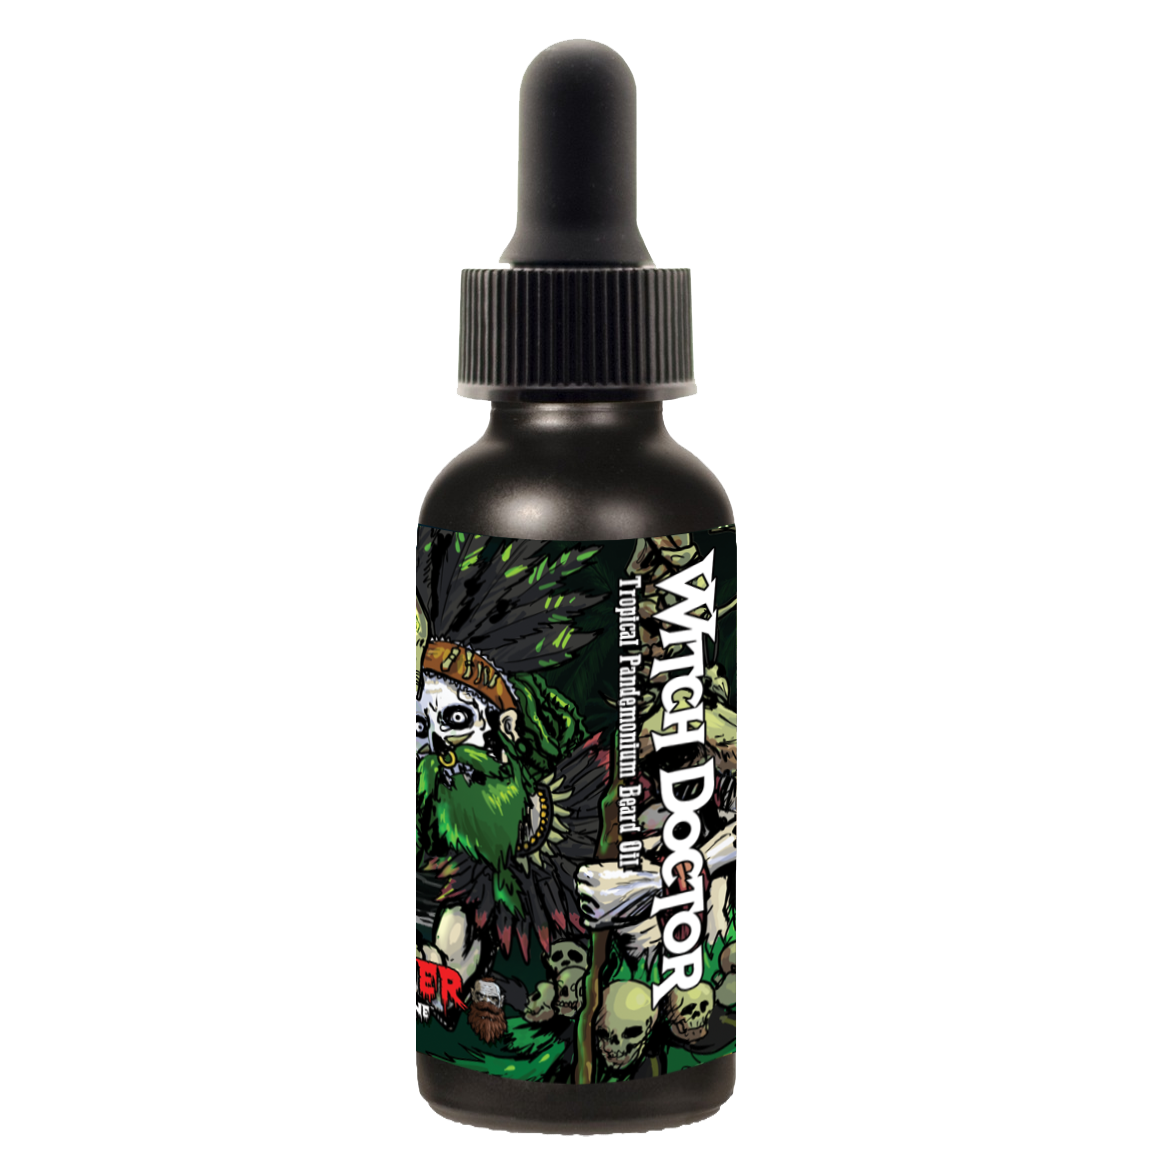 Witch Doctor Beard Oil - Key Lime Coconut Scent